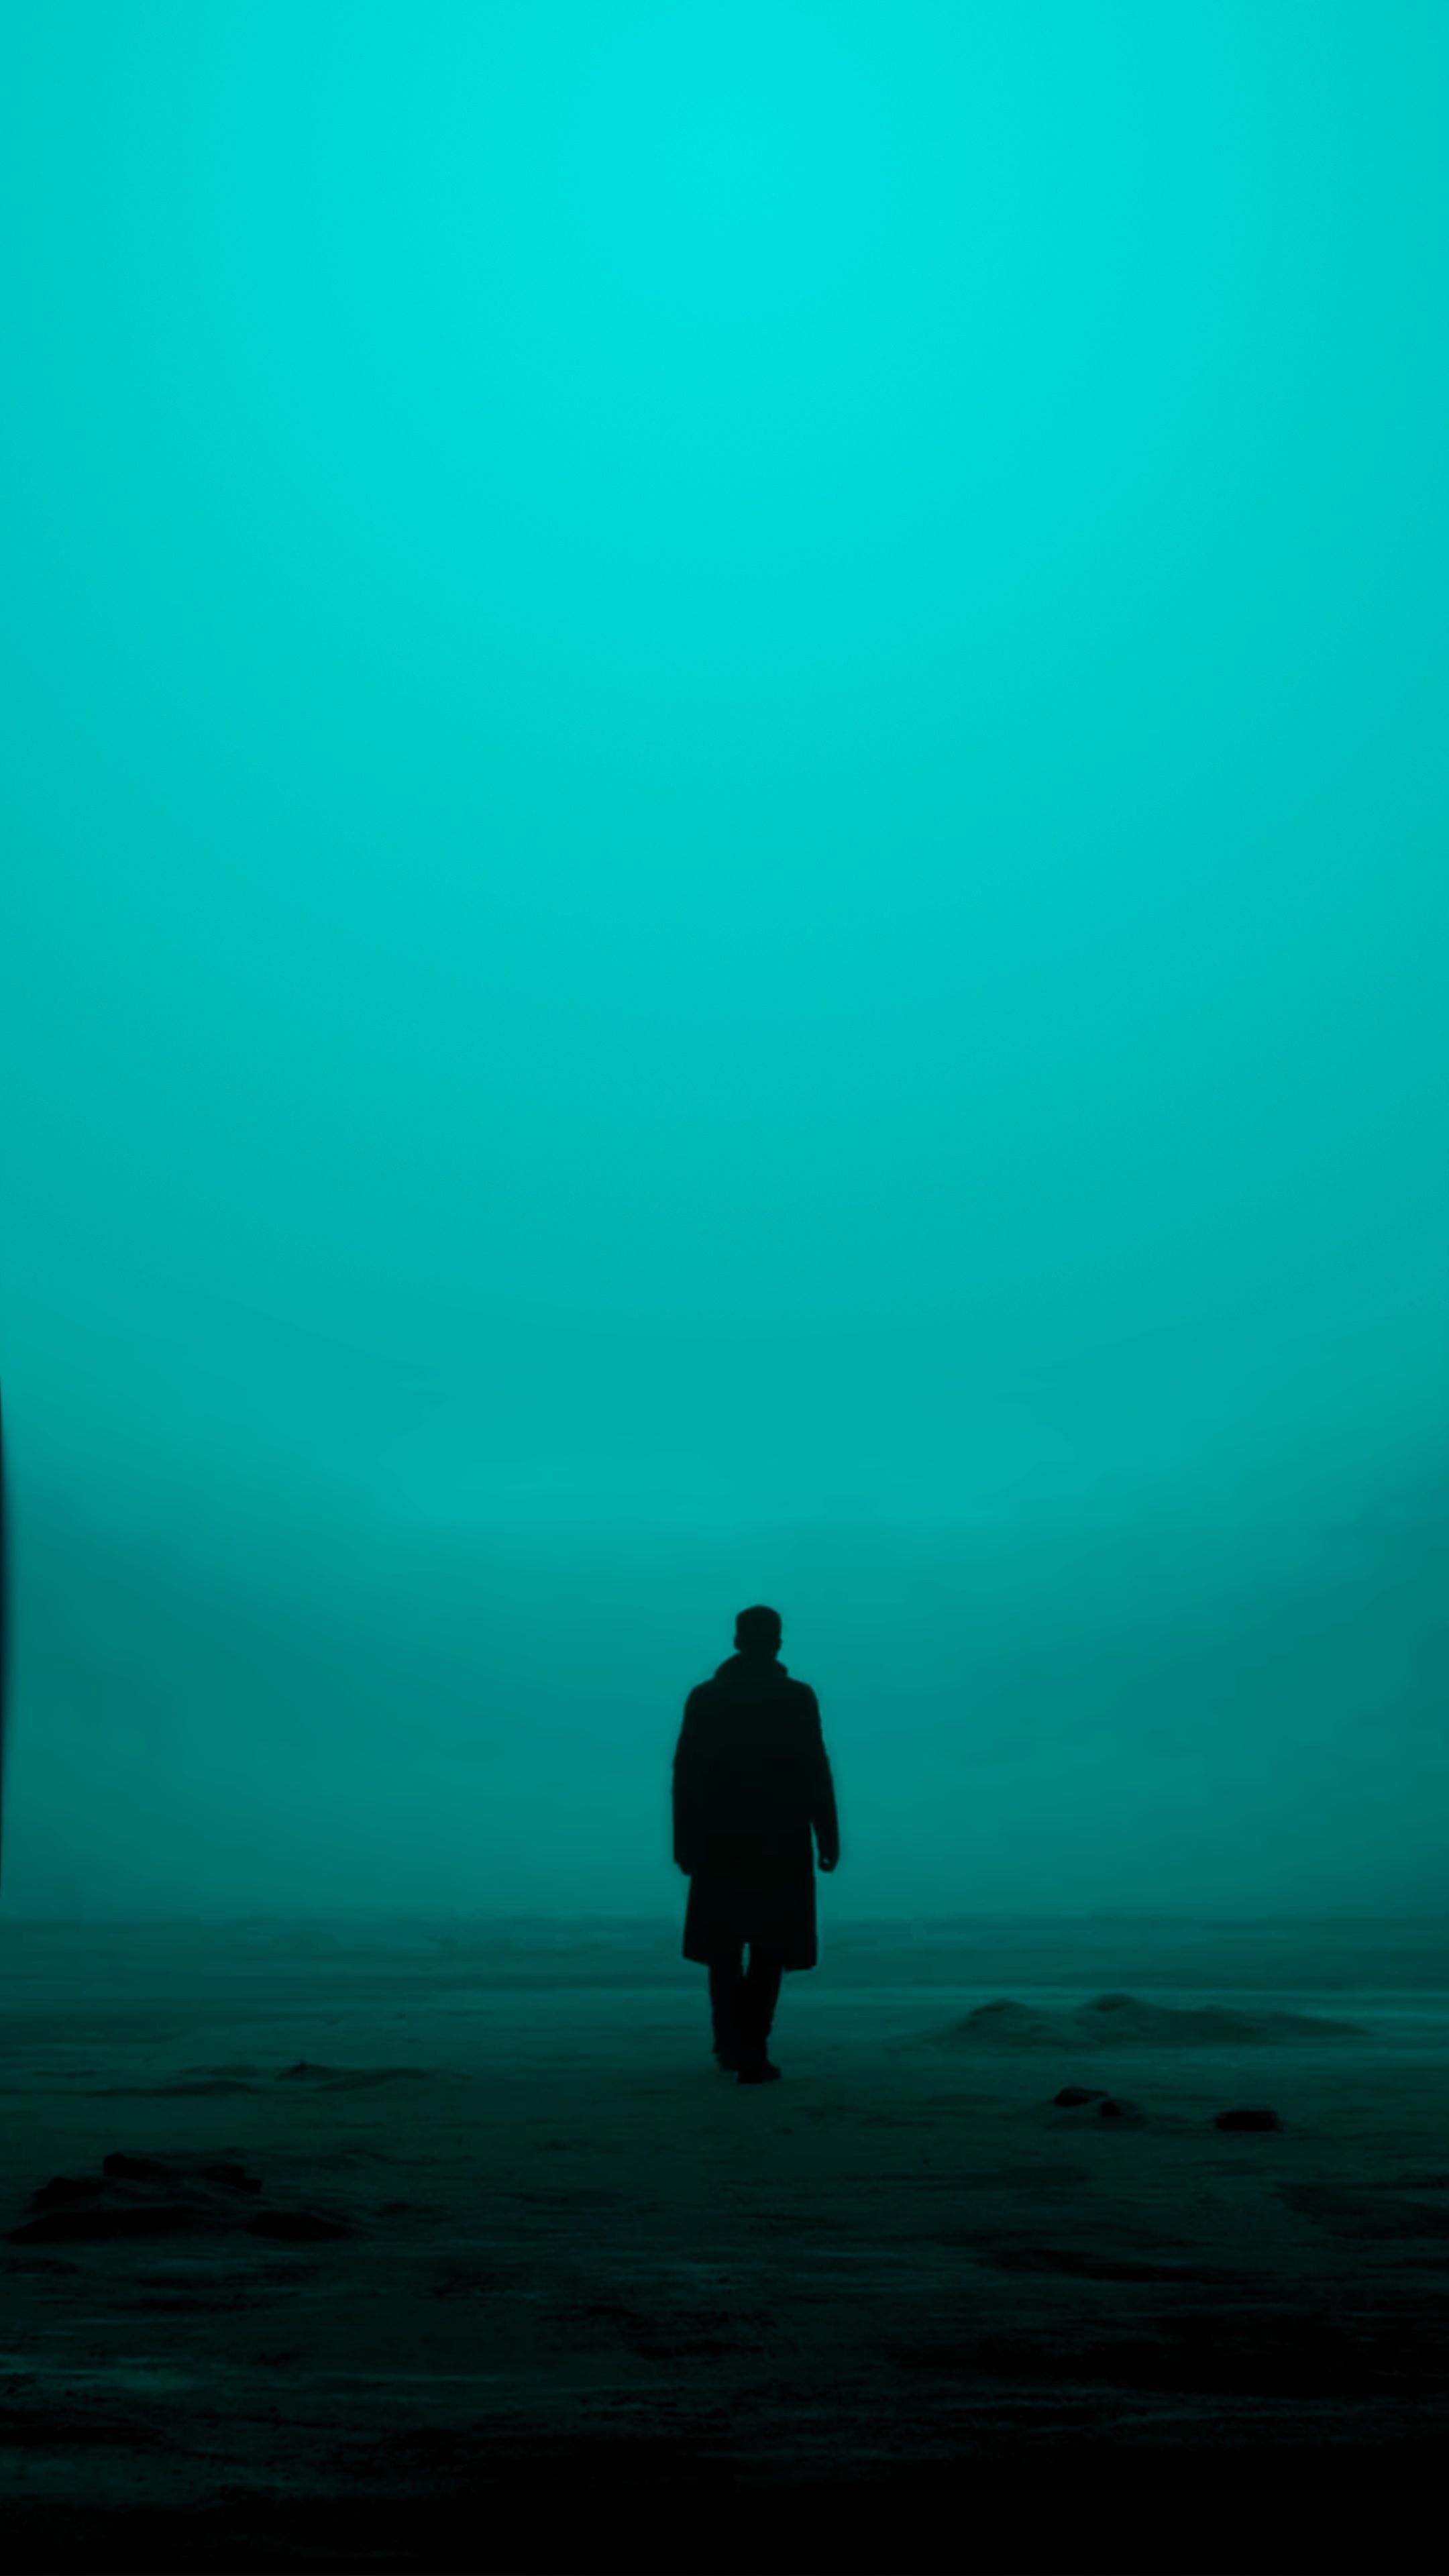 Blade Runner 2049 Wallpapers for Your iPhone and iPad.